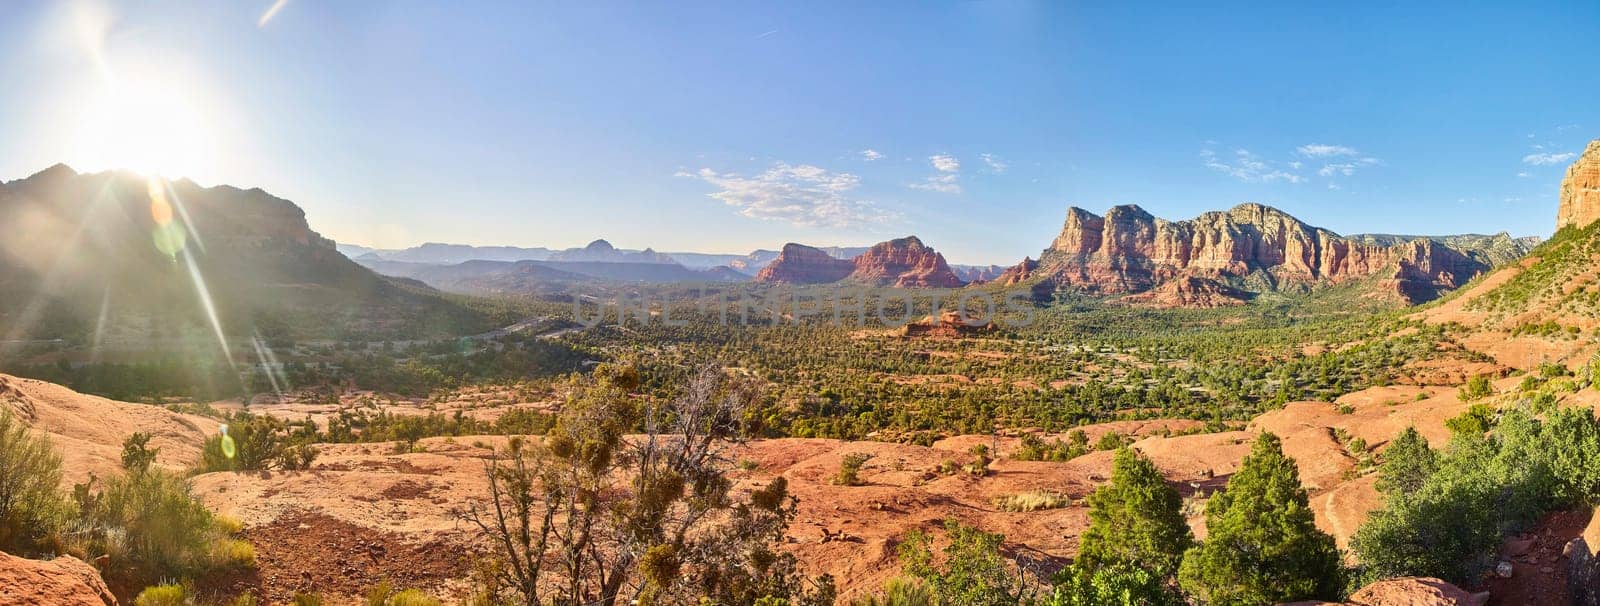 Breathtaking panoramic view of Arizona's majestic red rock formations in Sedona, bathed in the warm glow of the sun, showcasing desert beauty and the allure of adventure travel, 2016.